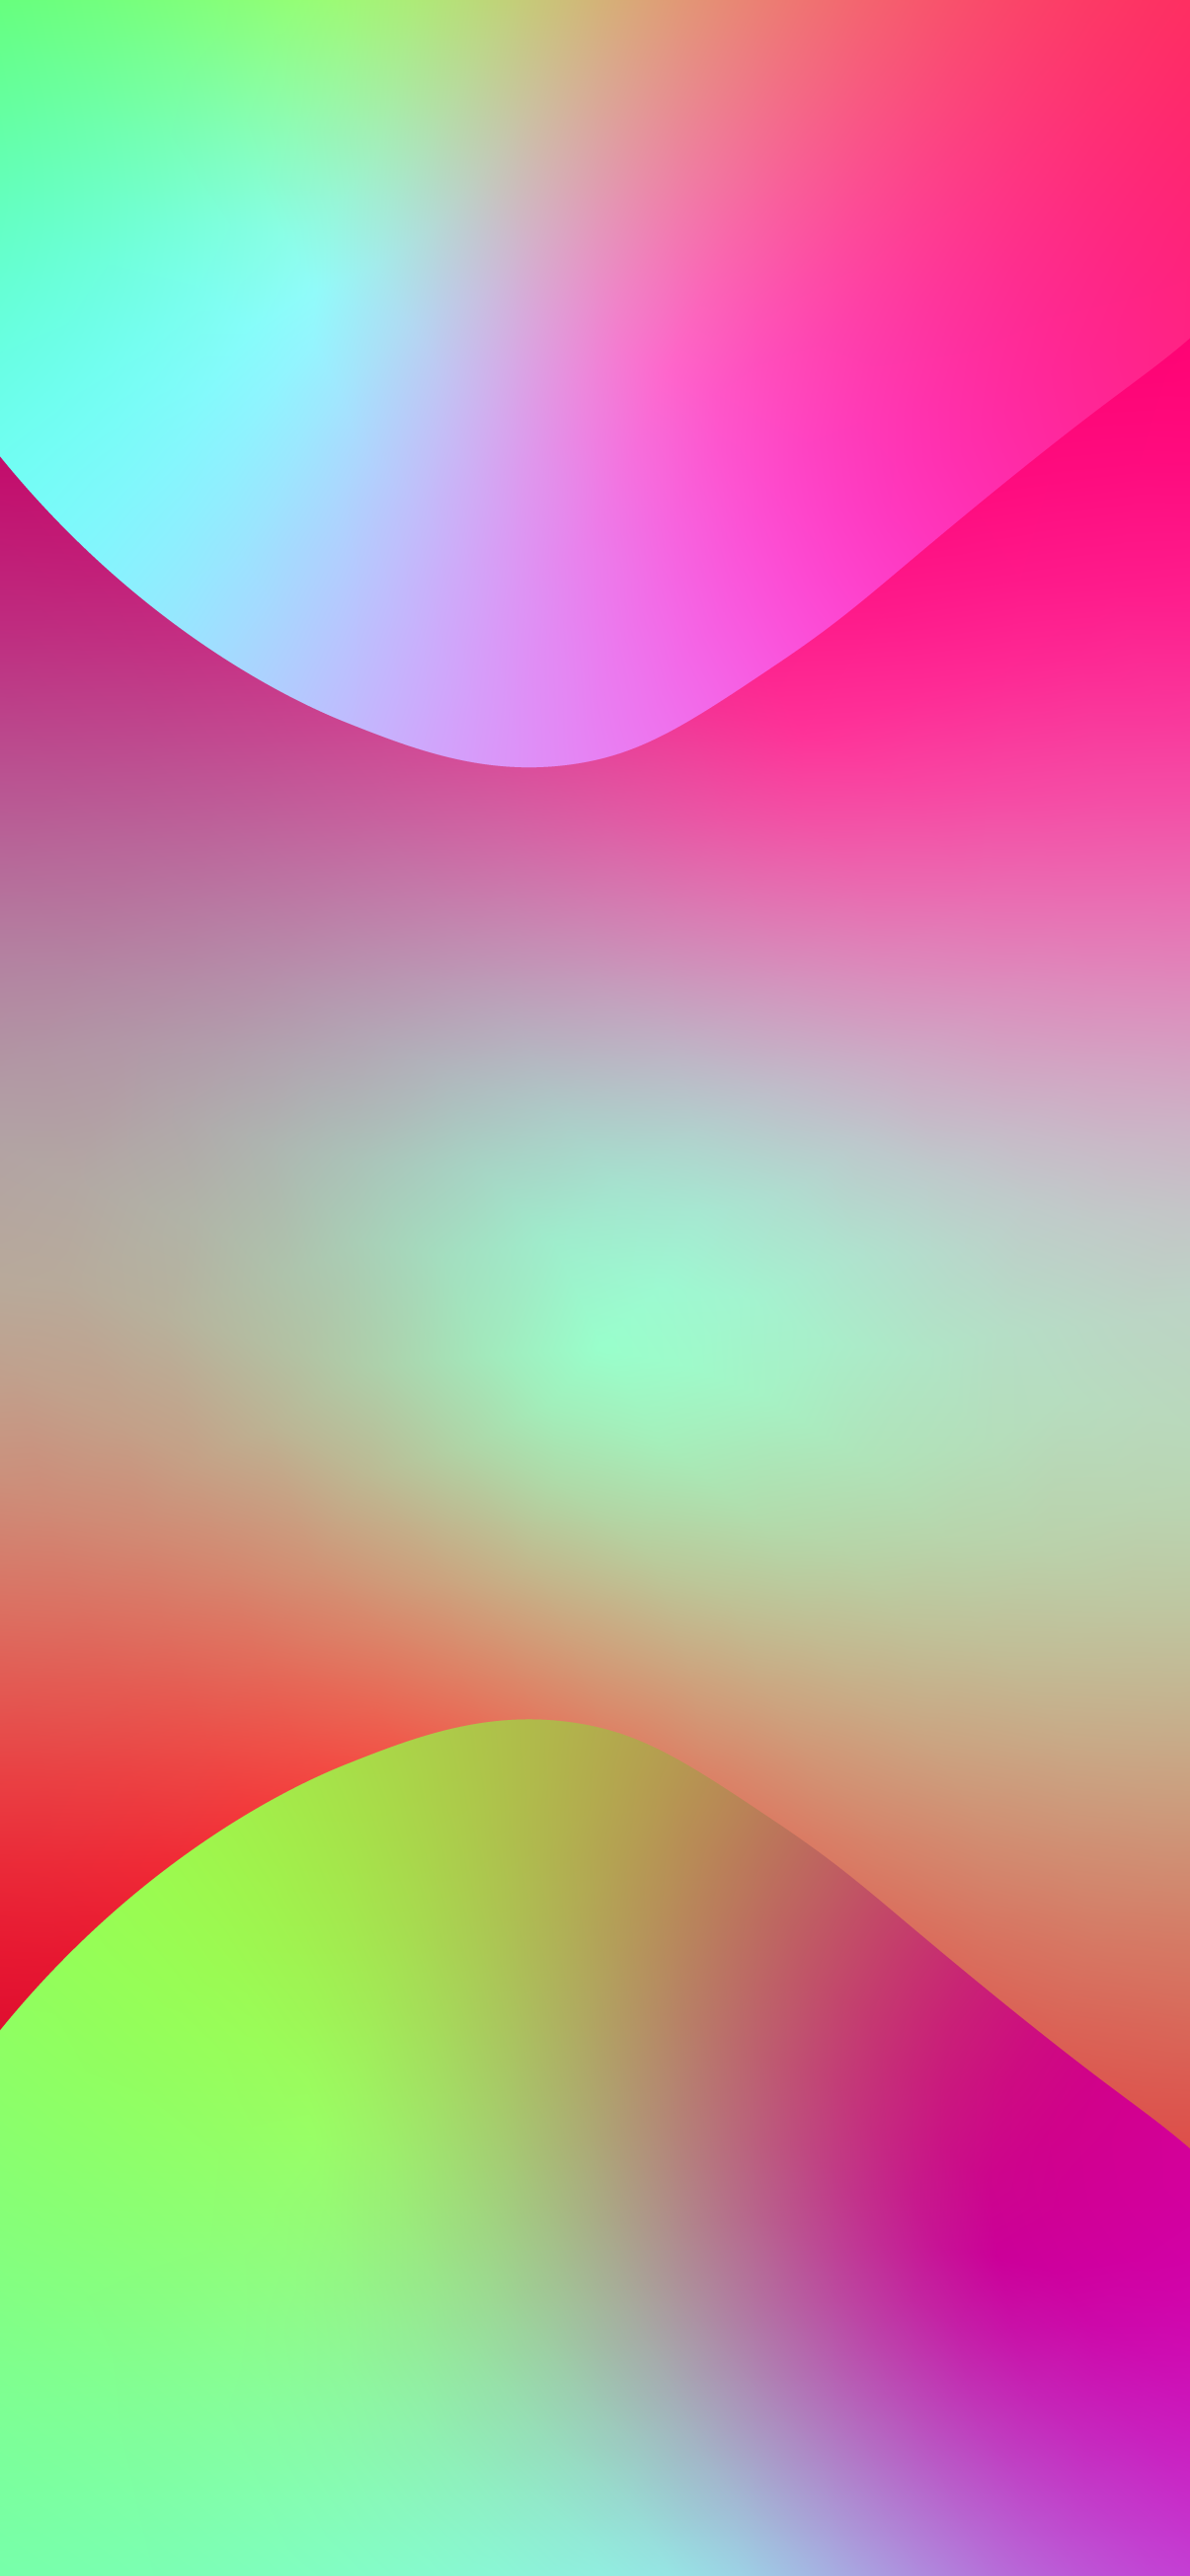 Cool abstract iphone wallpaper